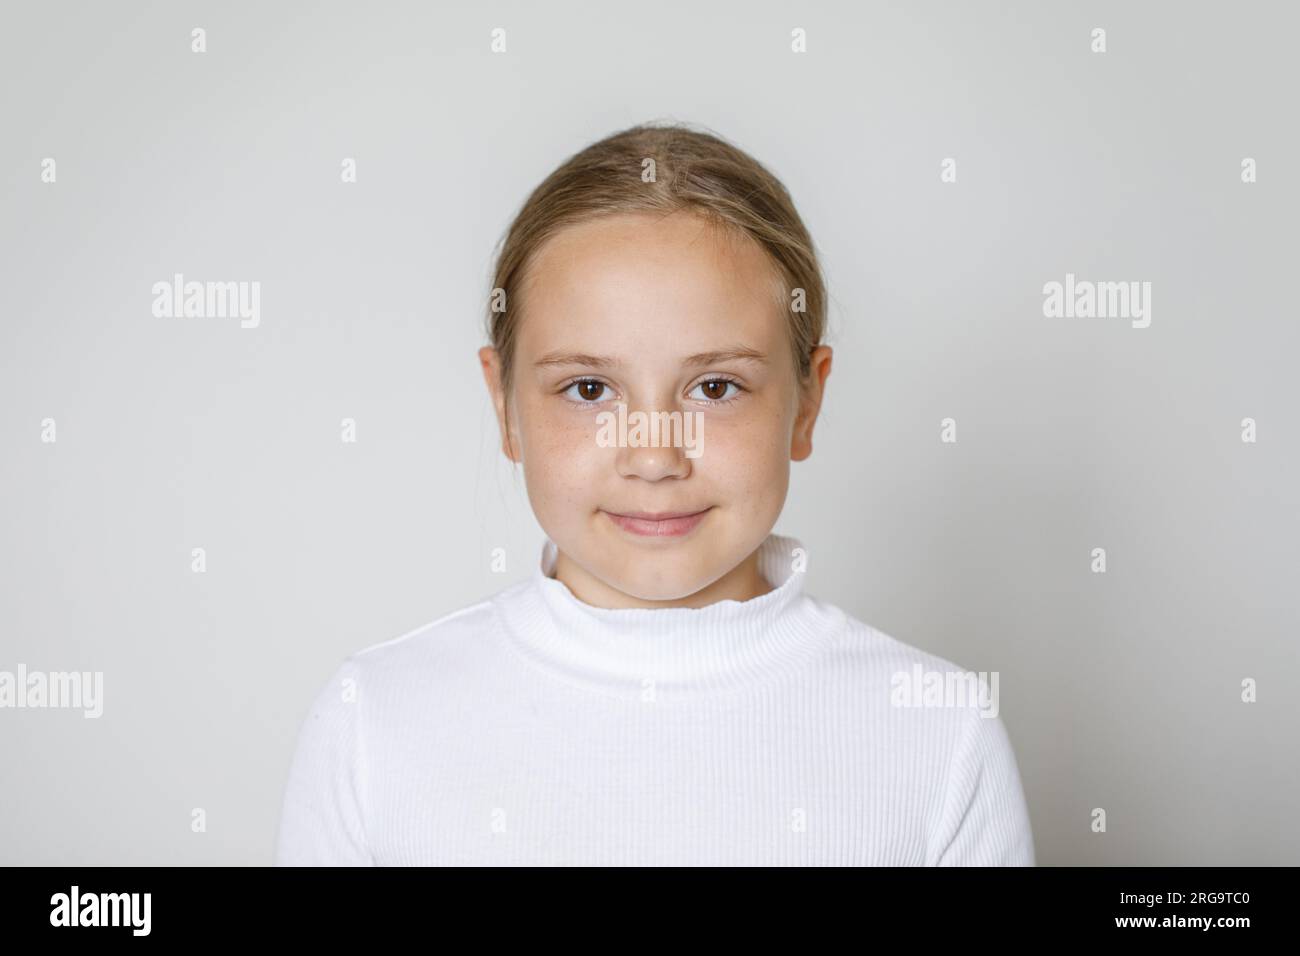 8-10 Year Old Child Form - White